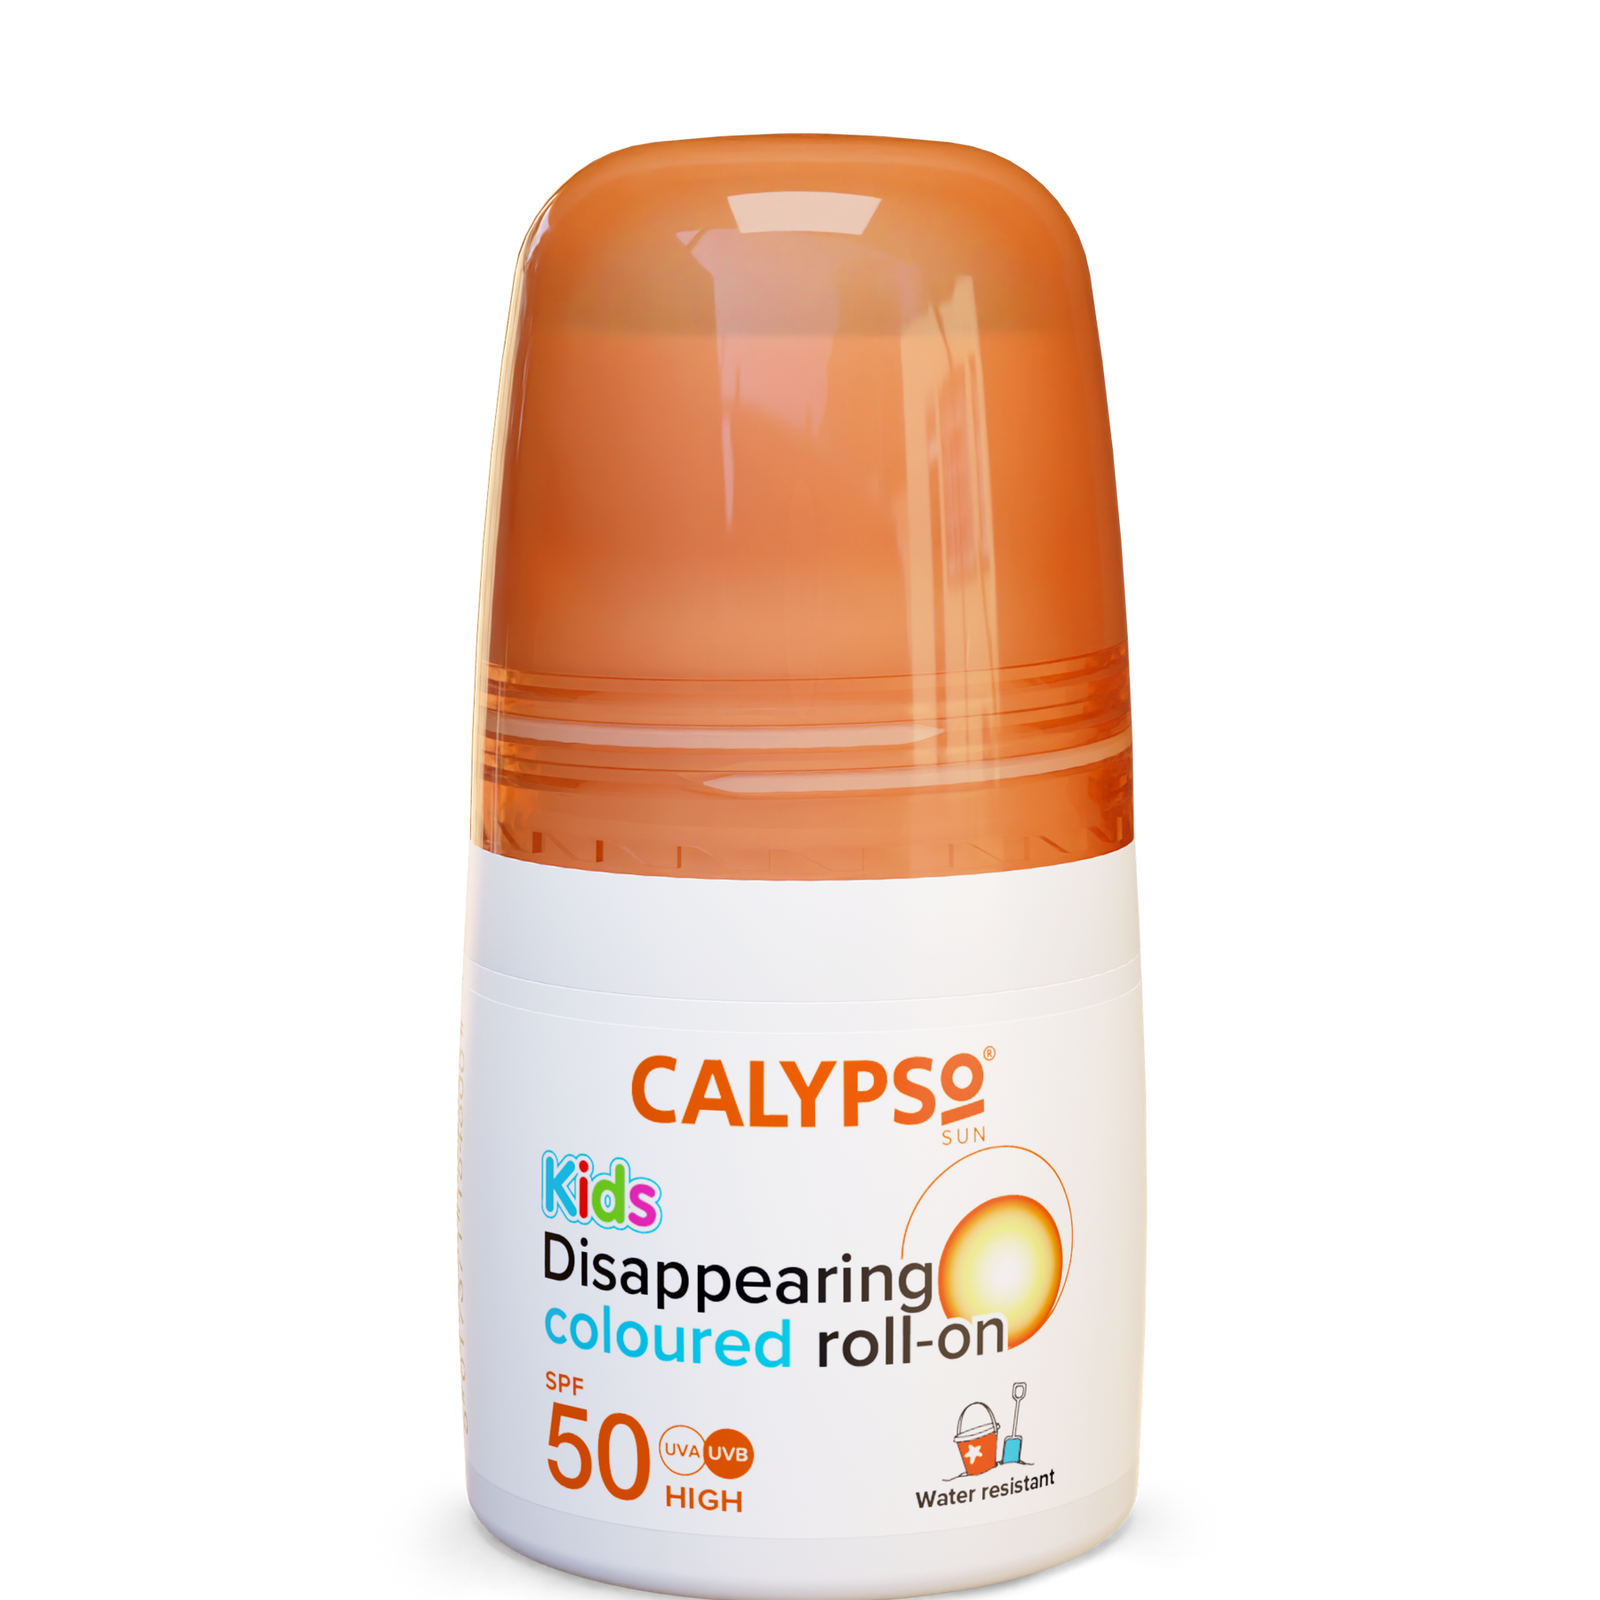 Calypso Kids Disappearing Coloured Roll On SPF 50 50ml